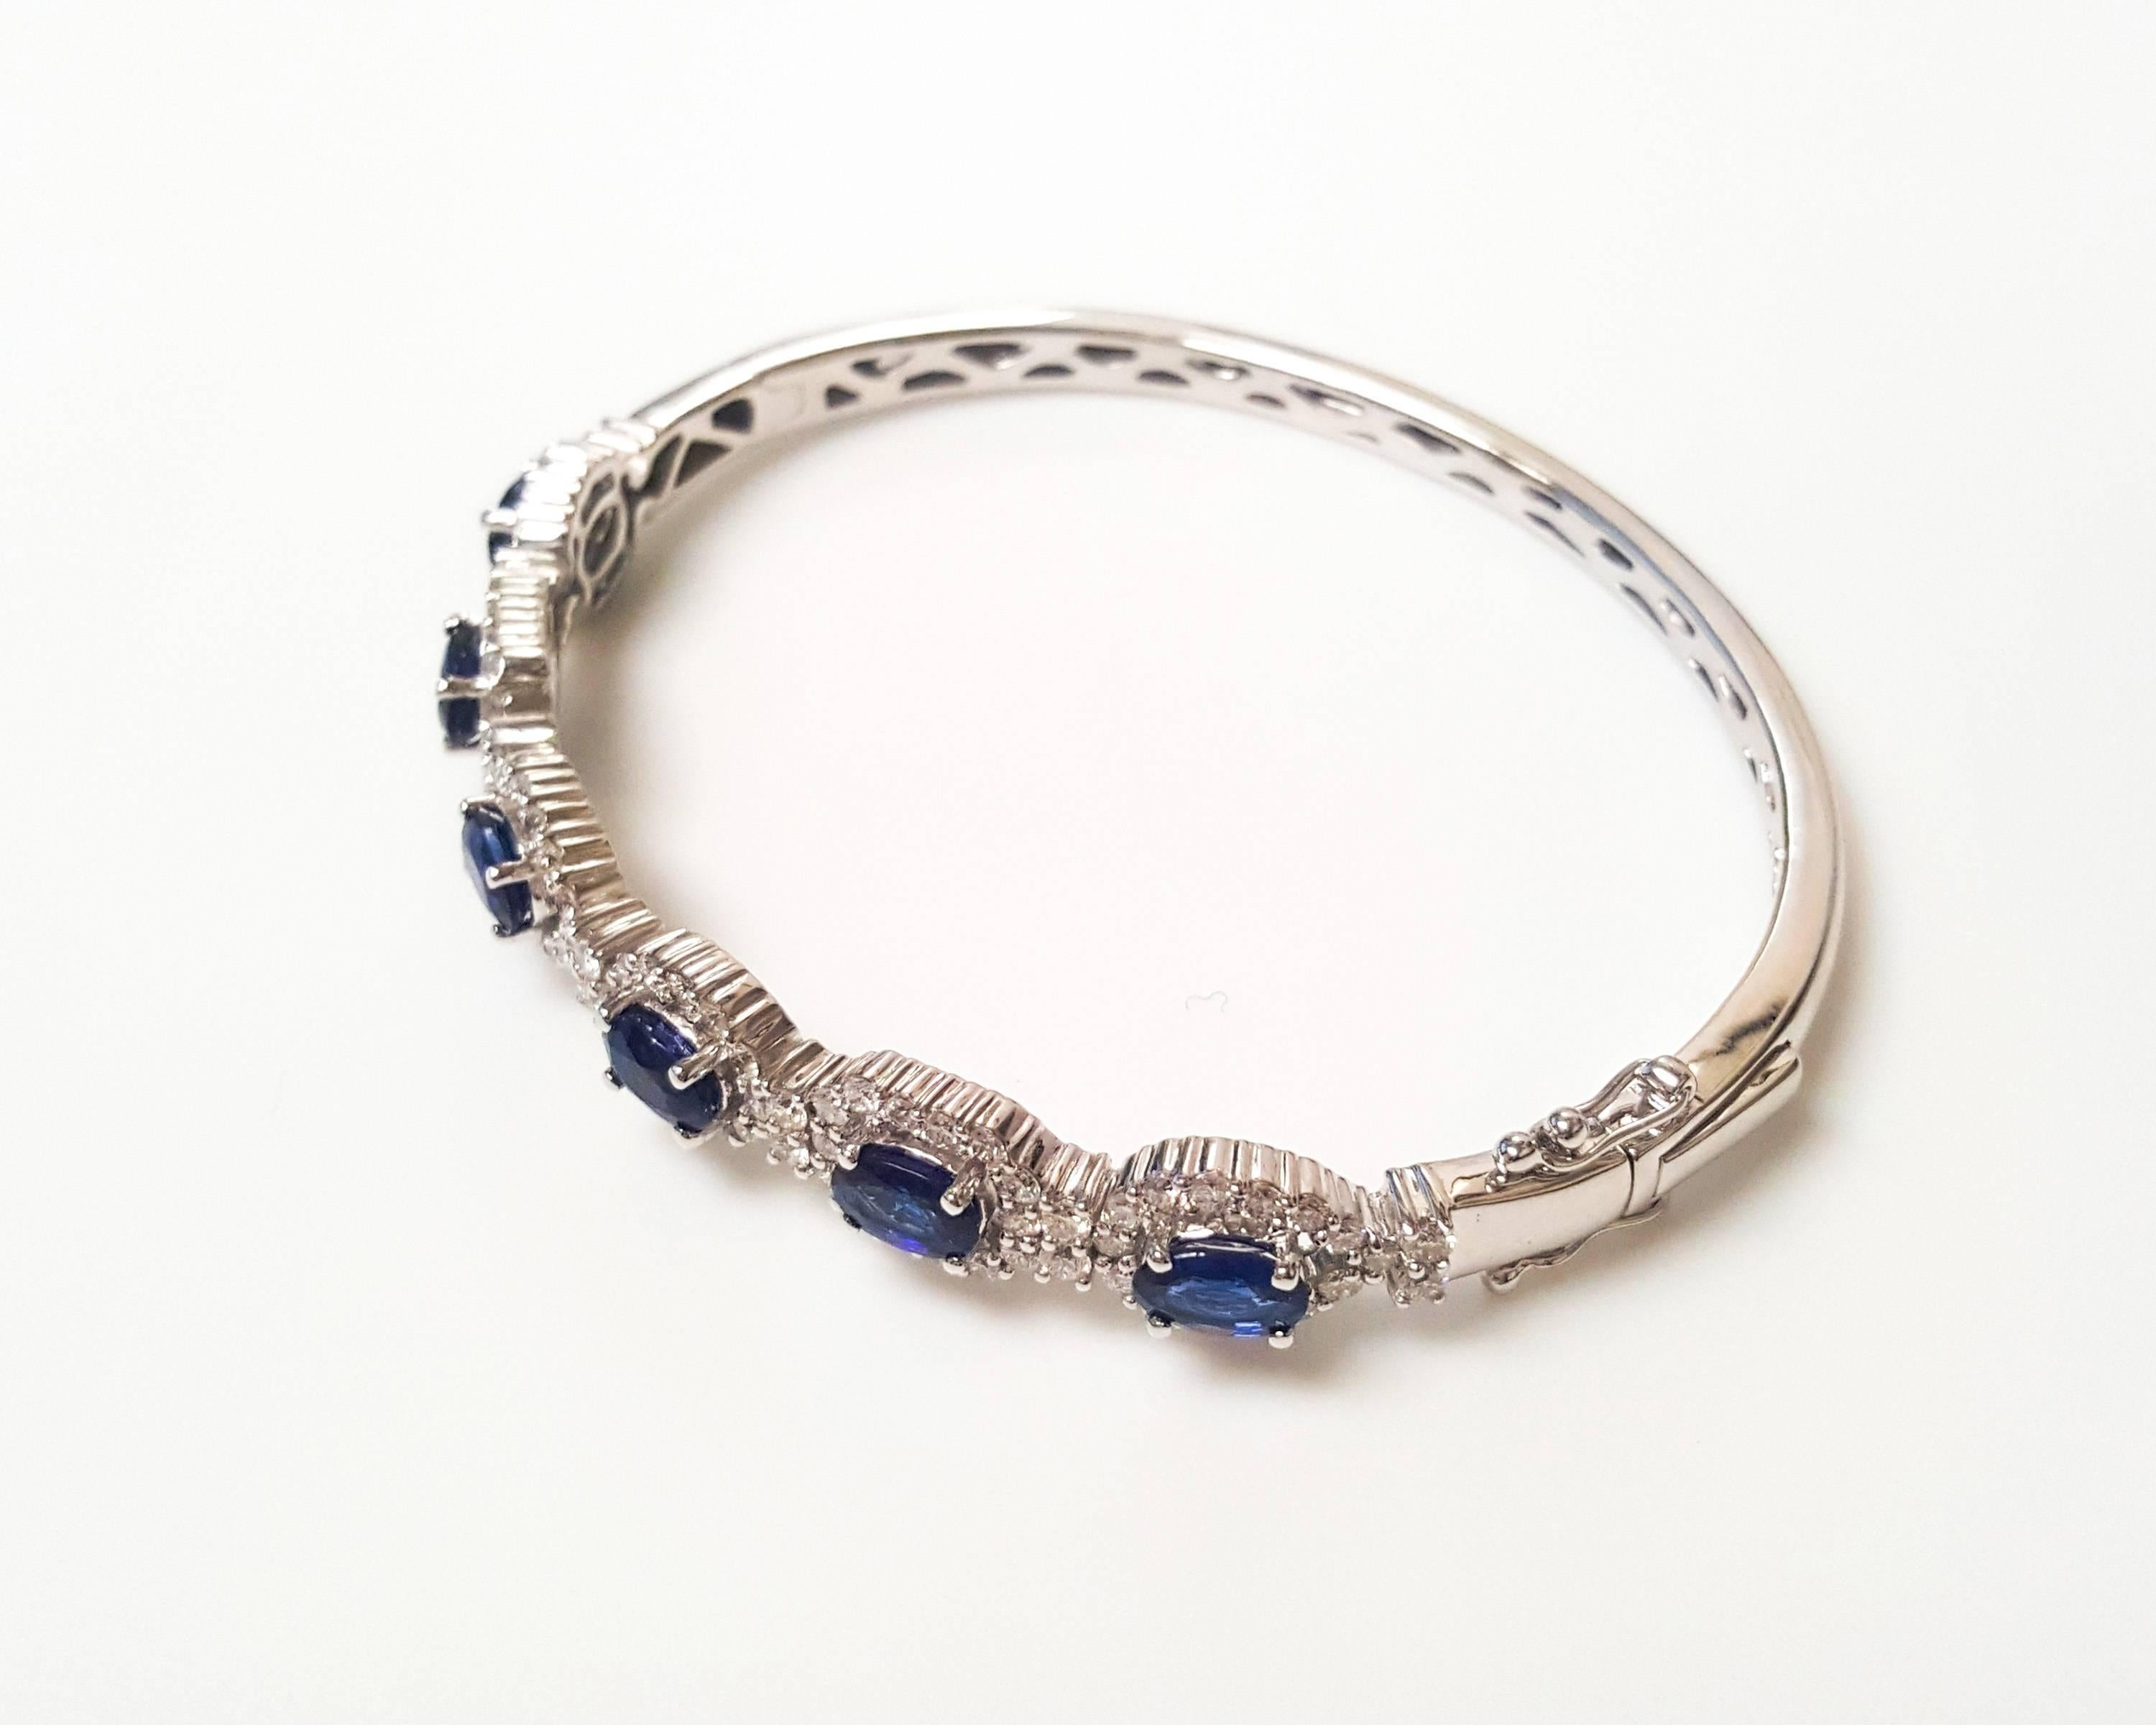 This Ladies 14k White Gold Bangle has 3.69 carats of perfectly Matched Sapphires and 1.62 carats of Diamonds.